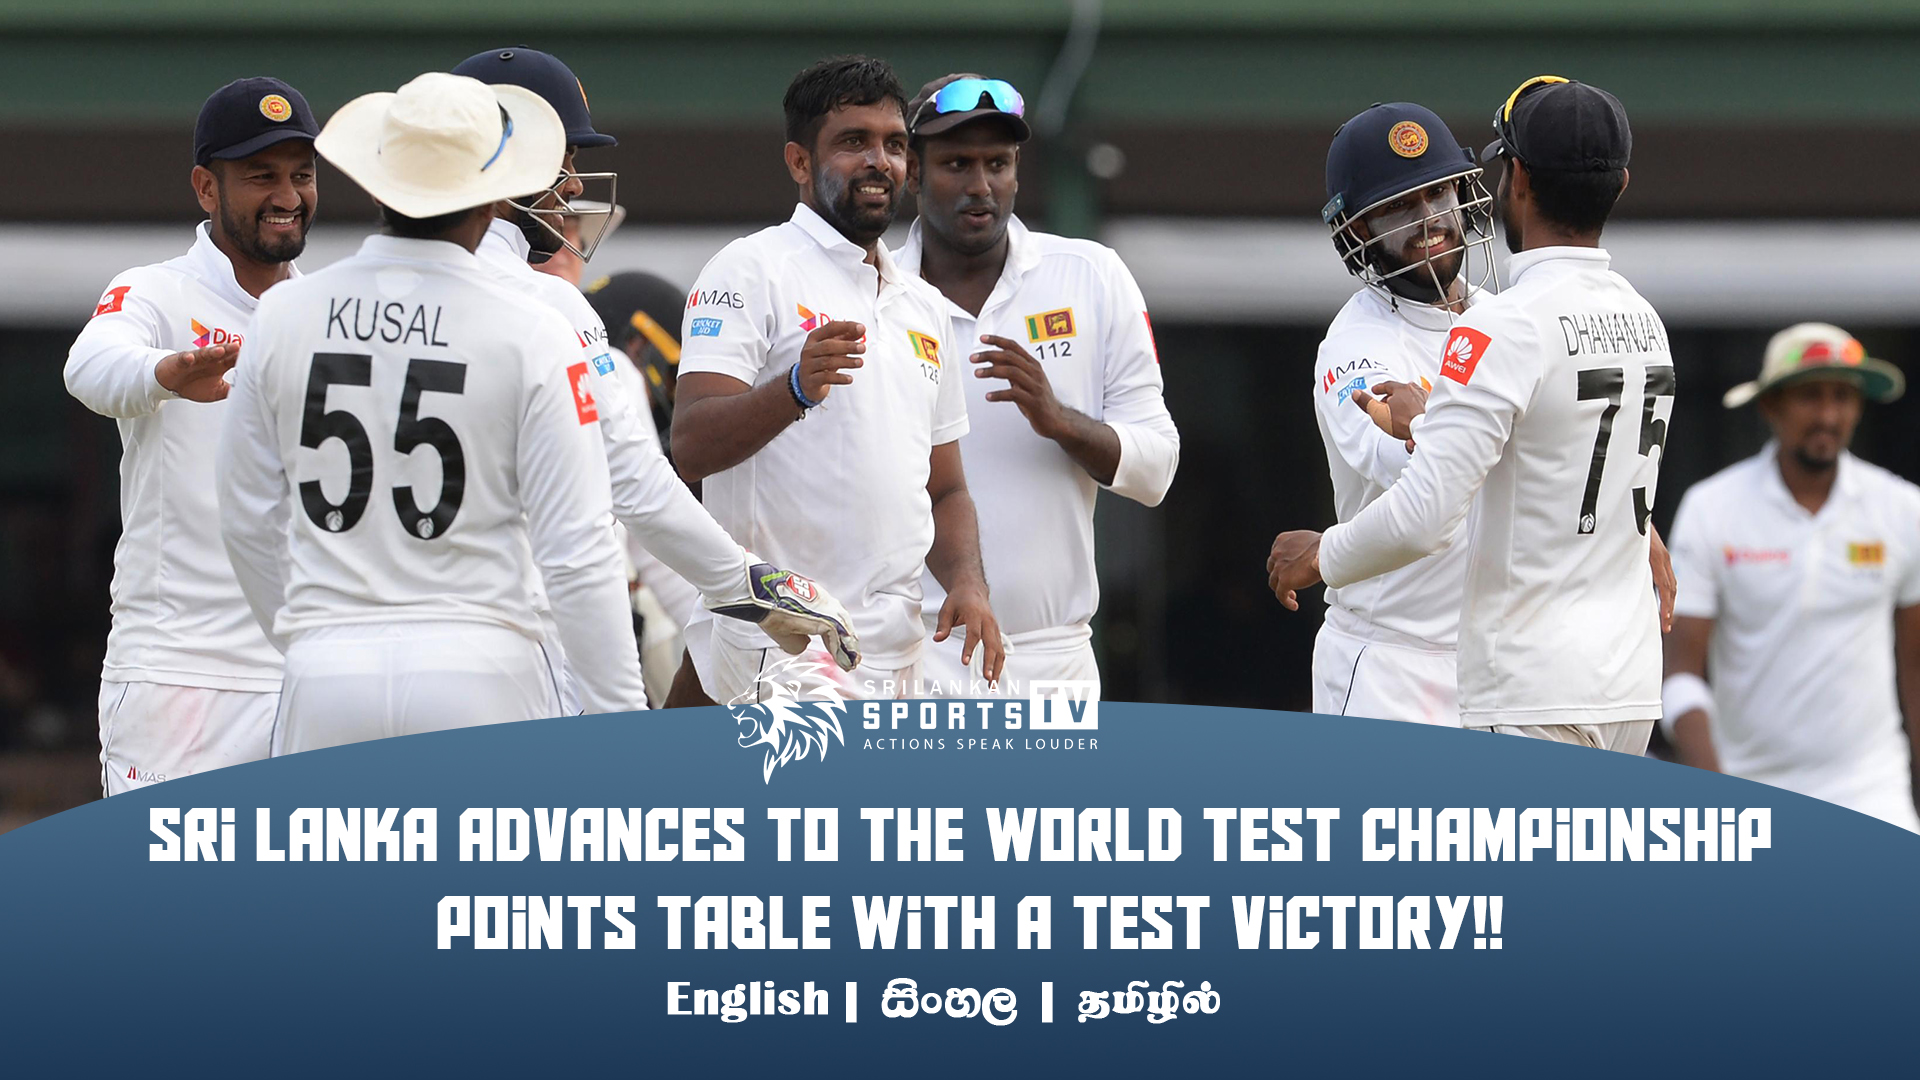 Sri Lanka advances to the World Test Championship points table with a Test victory!!